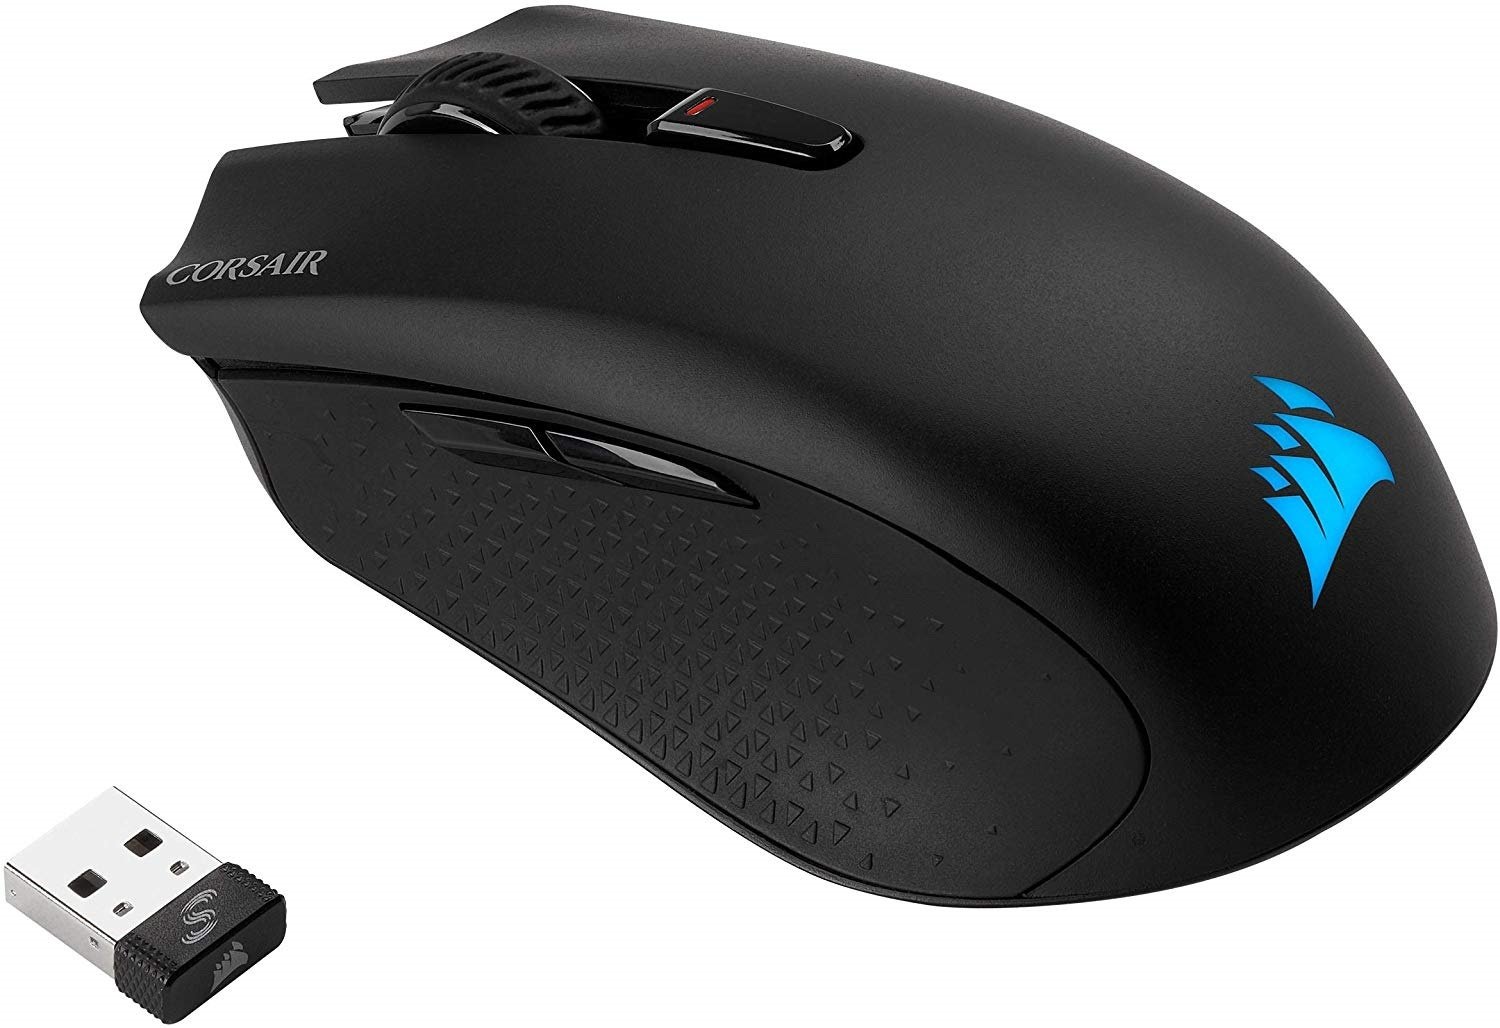 Corsair Harpoon Wireless Optical Mouse Review